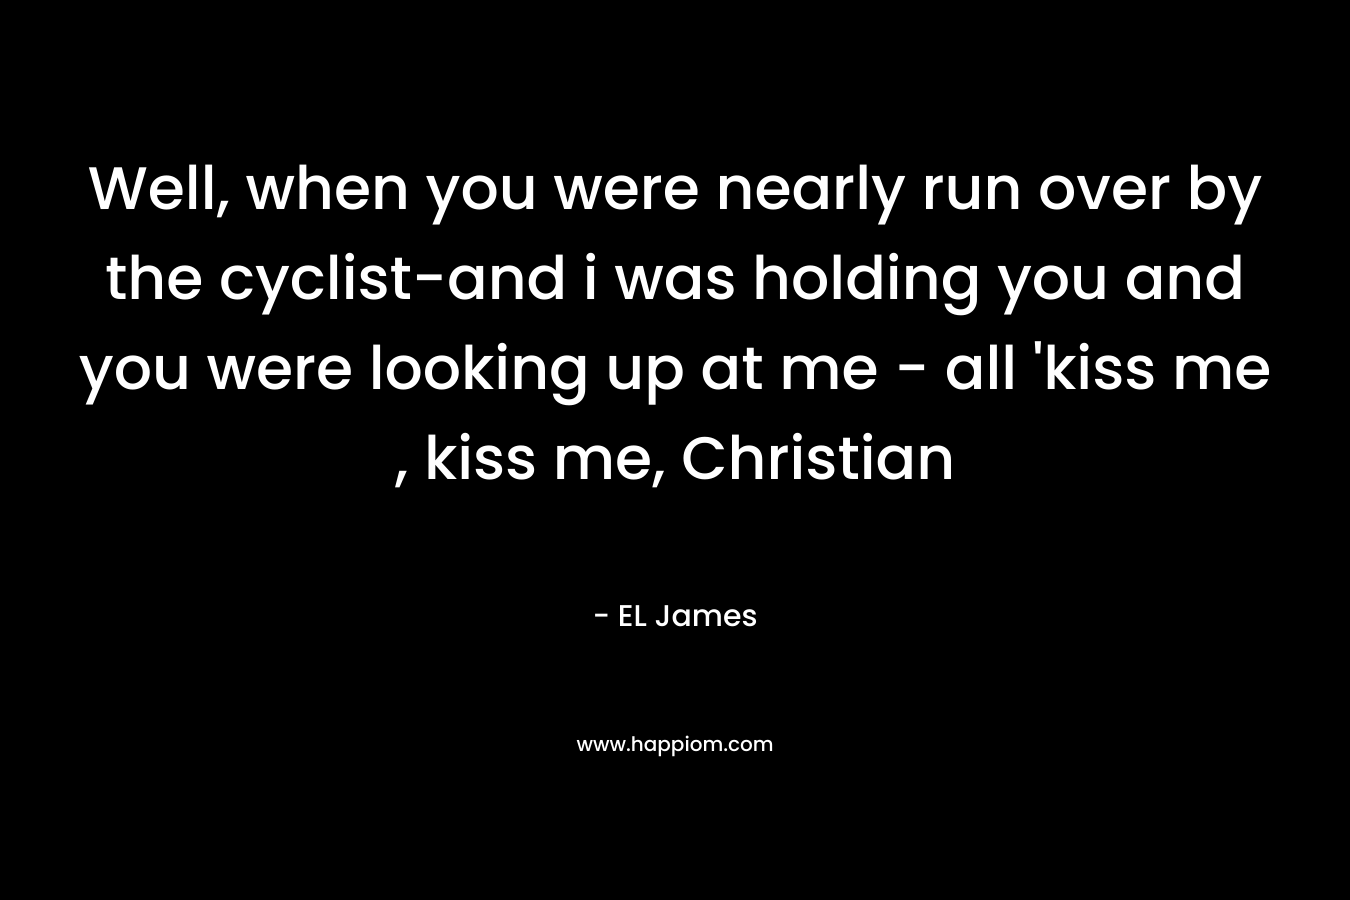 Well, when you were nearly run over by the cyclist-and i was holding you and you were looking up at me - all 'kiss me , kiss me, Christian